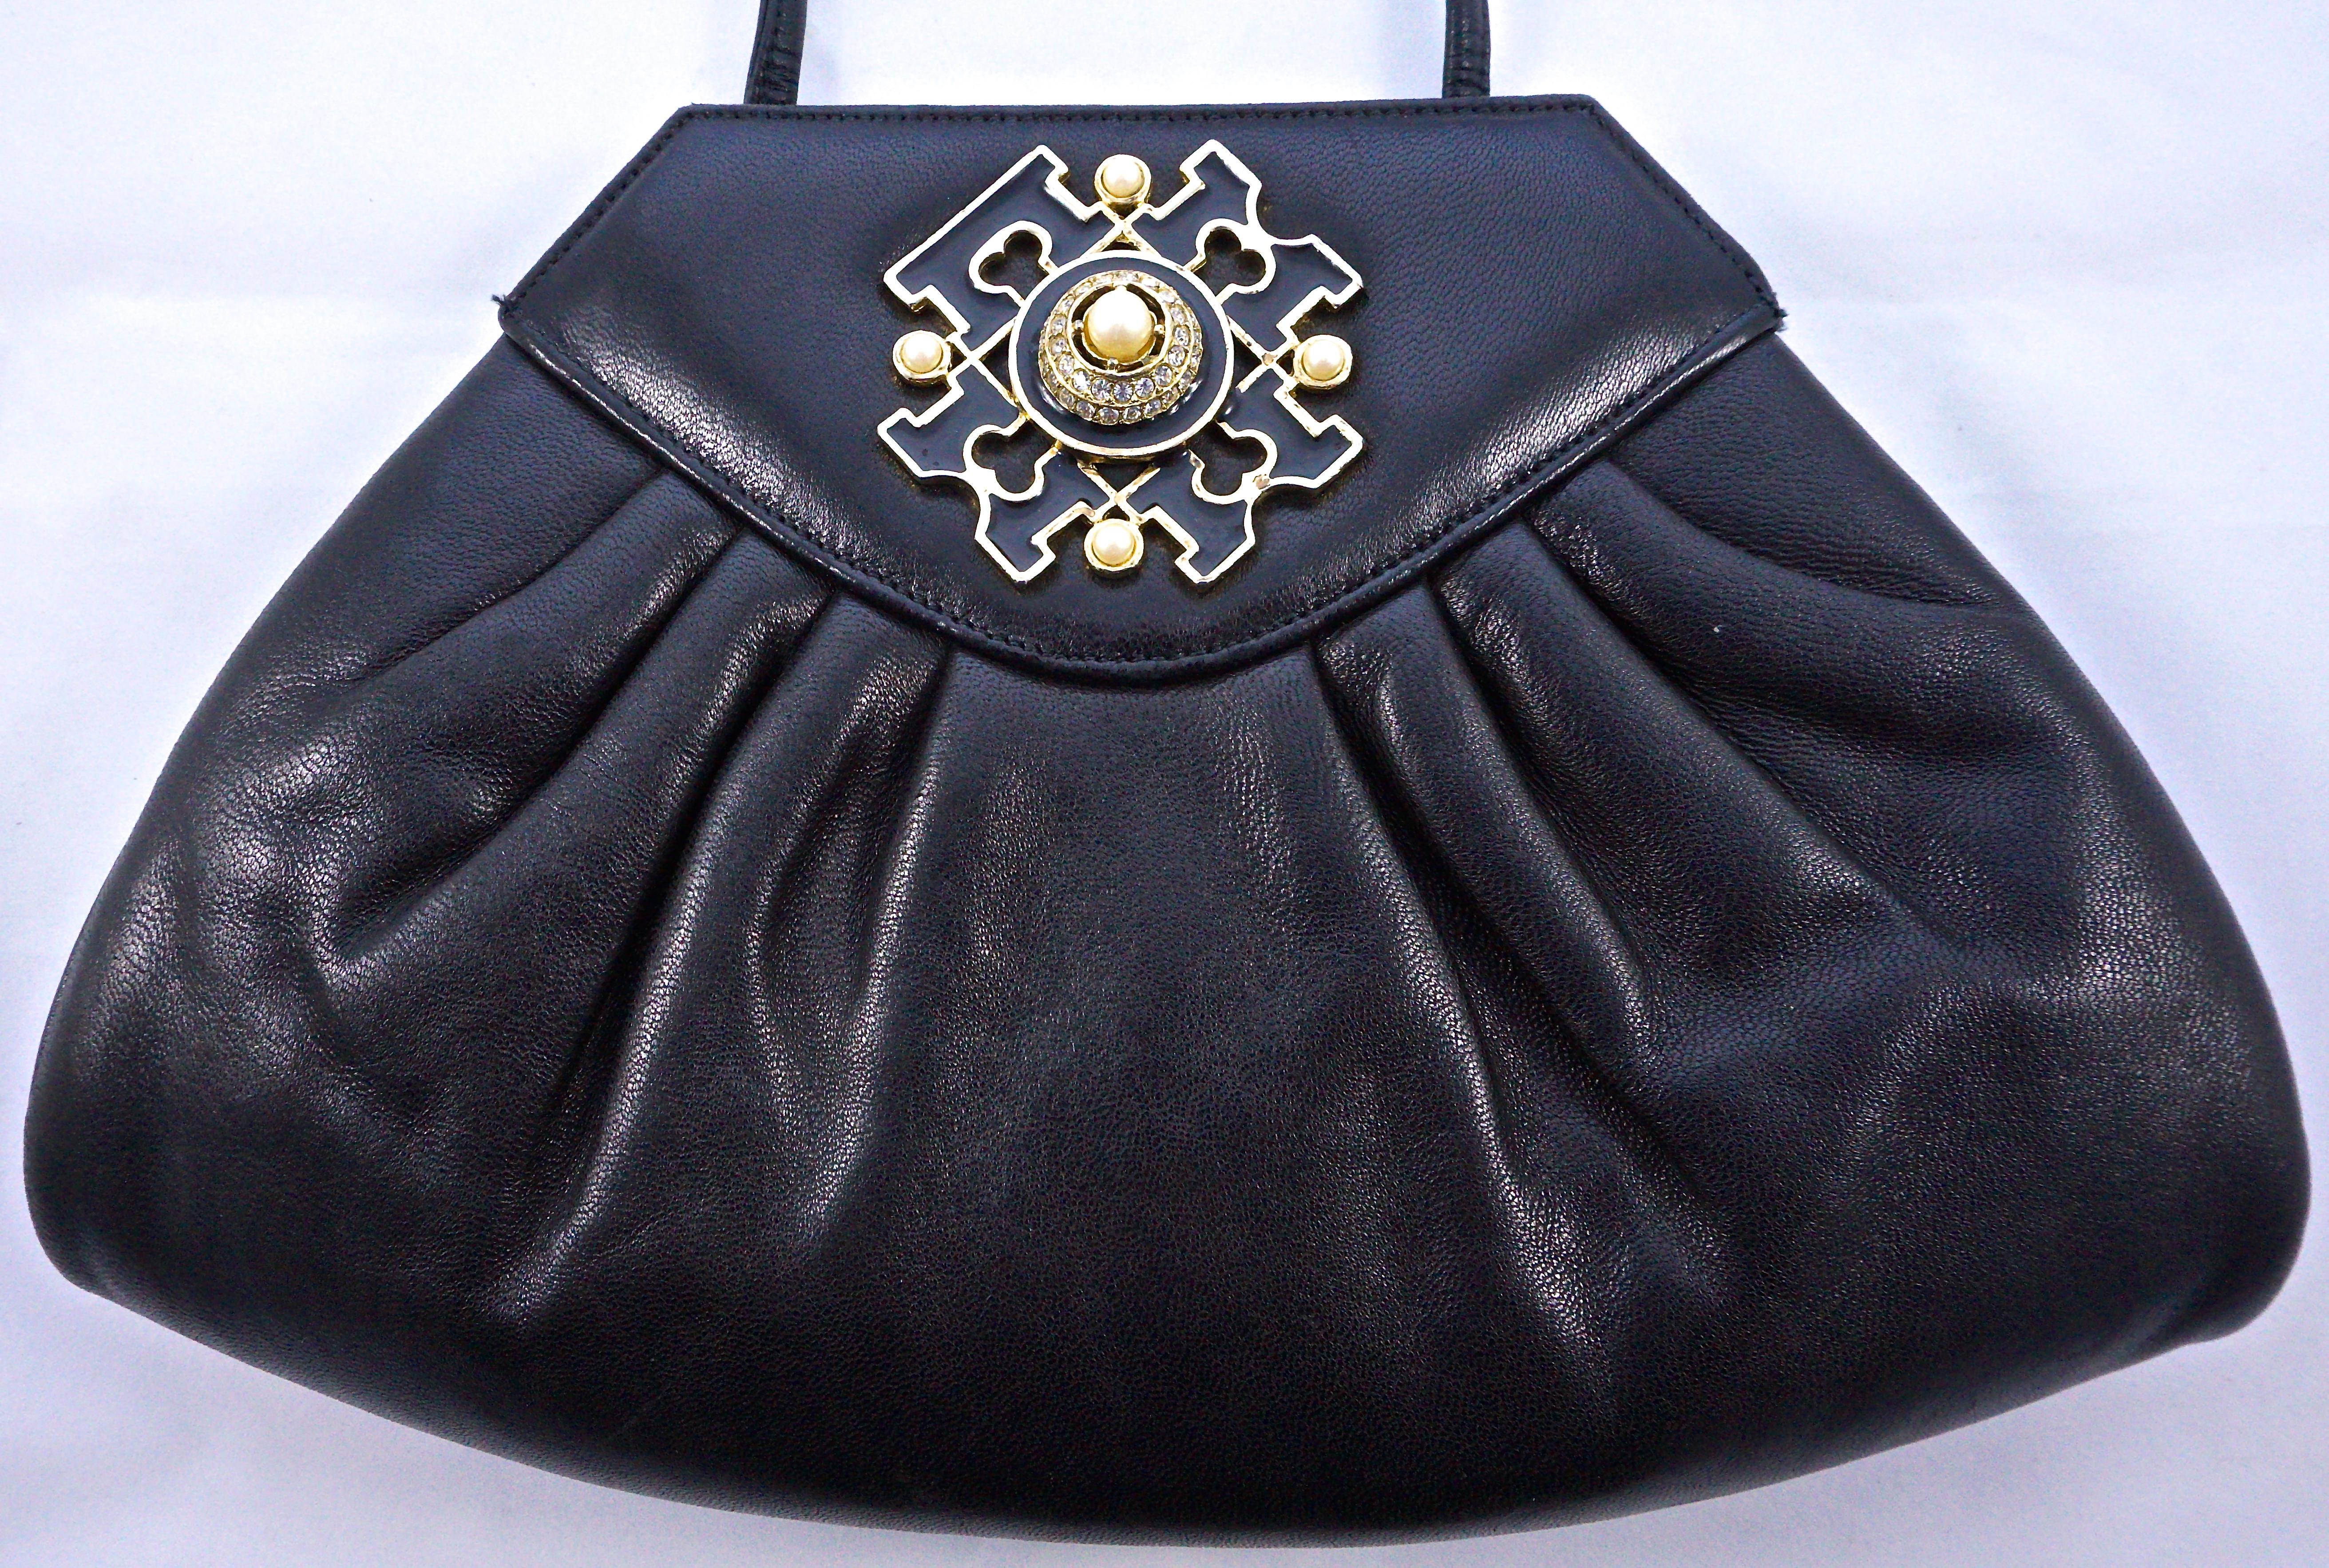 Susan Gail soft black leather shoulder bag. Measuring maximum length 28cm / 11 inches at the base, height 18.5cm / 7.28 inches, and maximum depth approximately 3cm / 1.18 inches. It has a lovely gold tone and black enamel design to the front, set